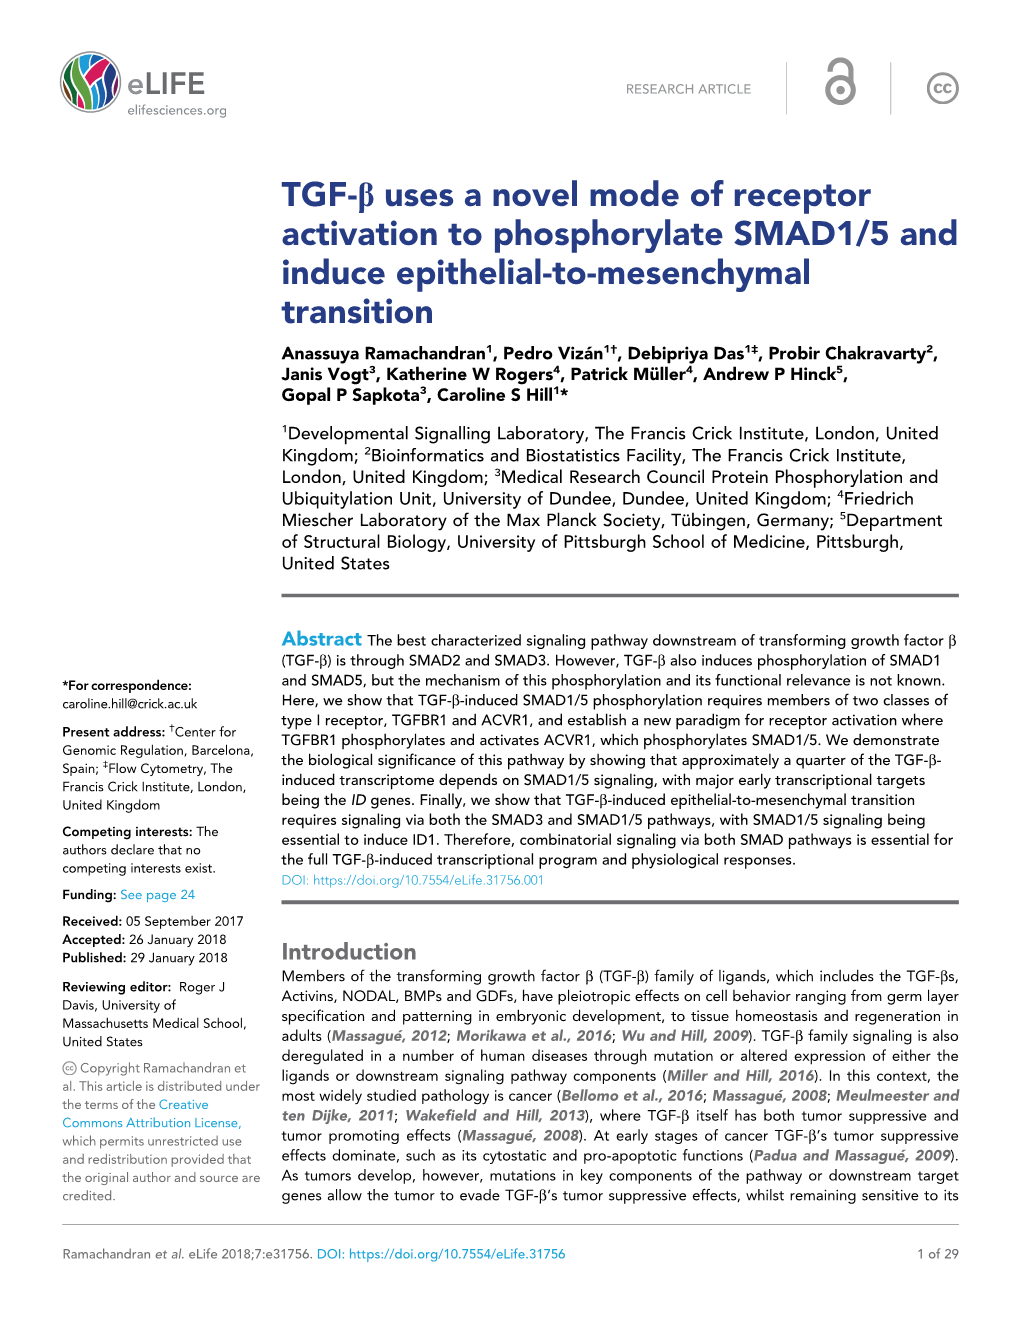 TGF-B Uses a Novel Mode of Receptor Activation to Phosphorylate SMAD1